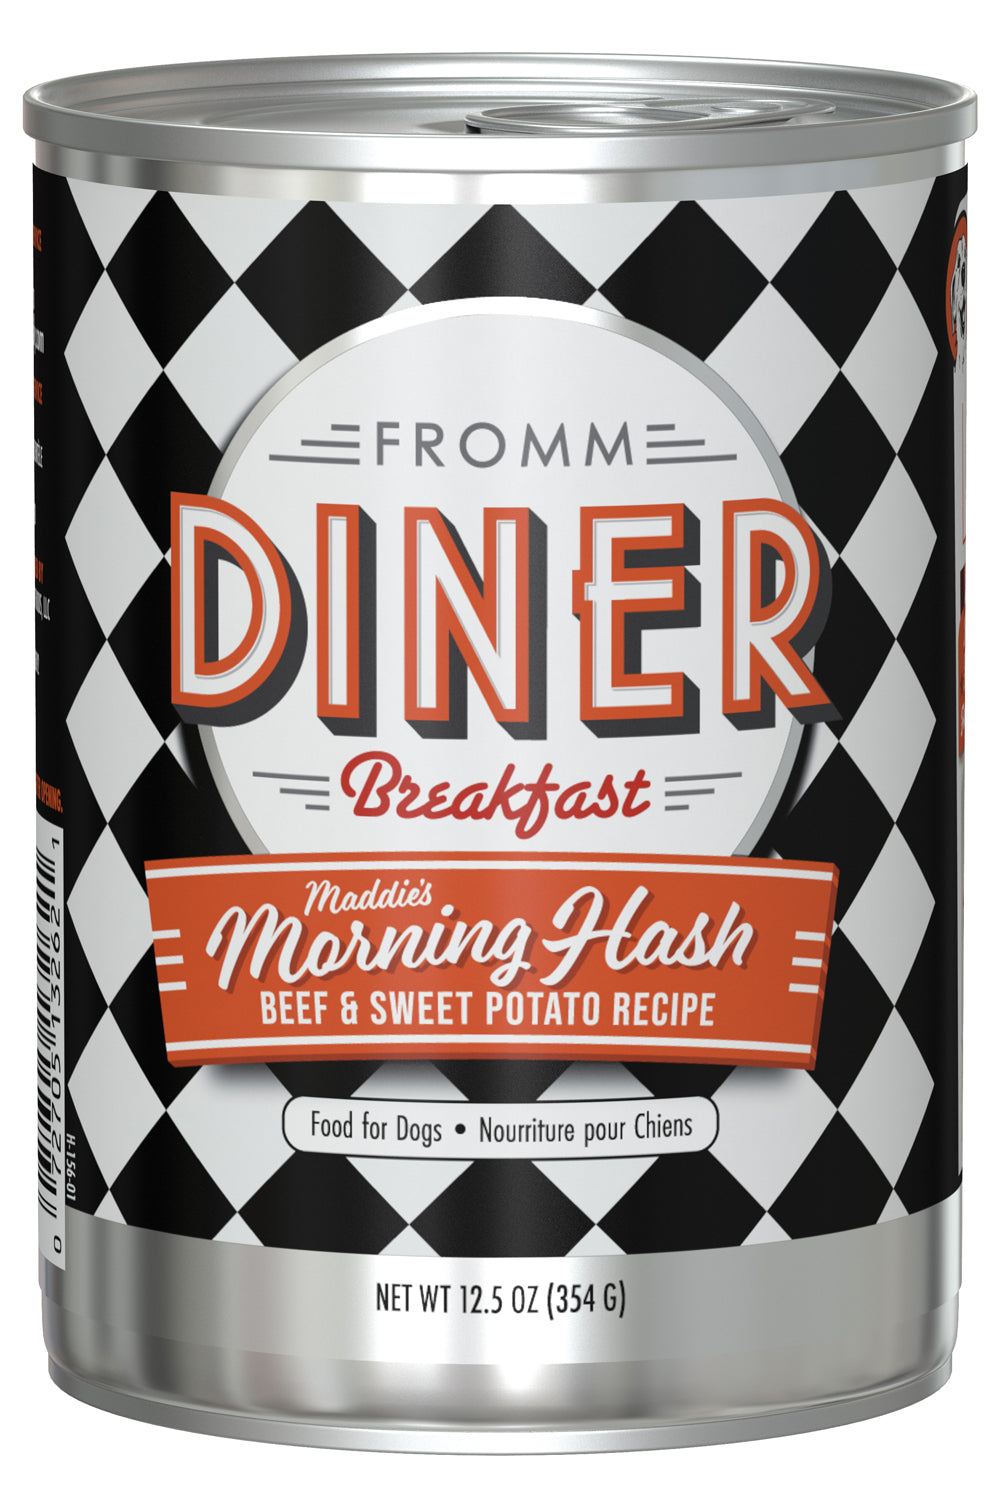 Fromm Diner Breakfast Maddie's Morning Hash Beef & Sweet Potato Canned Dog Food 12.5oz